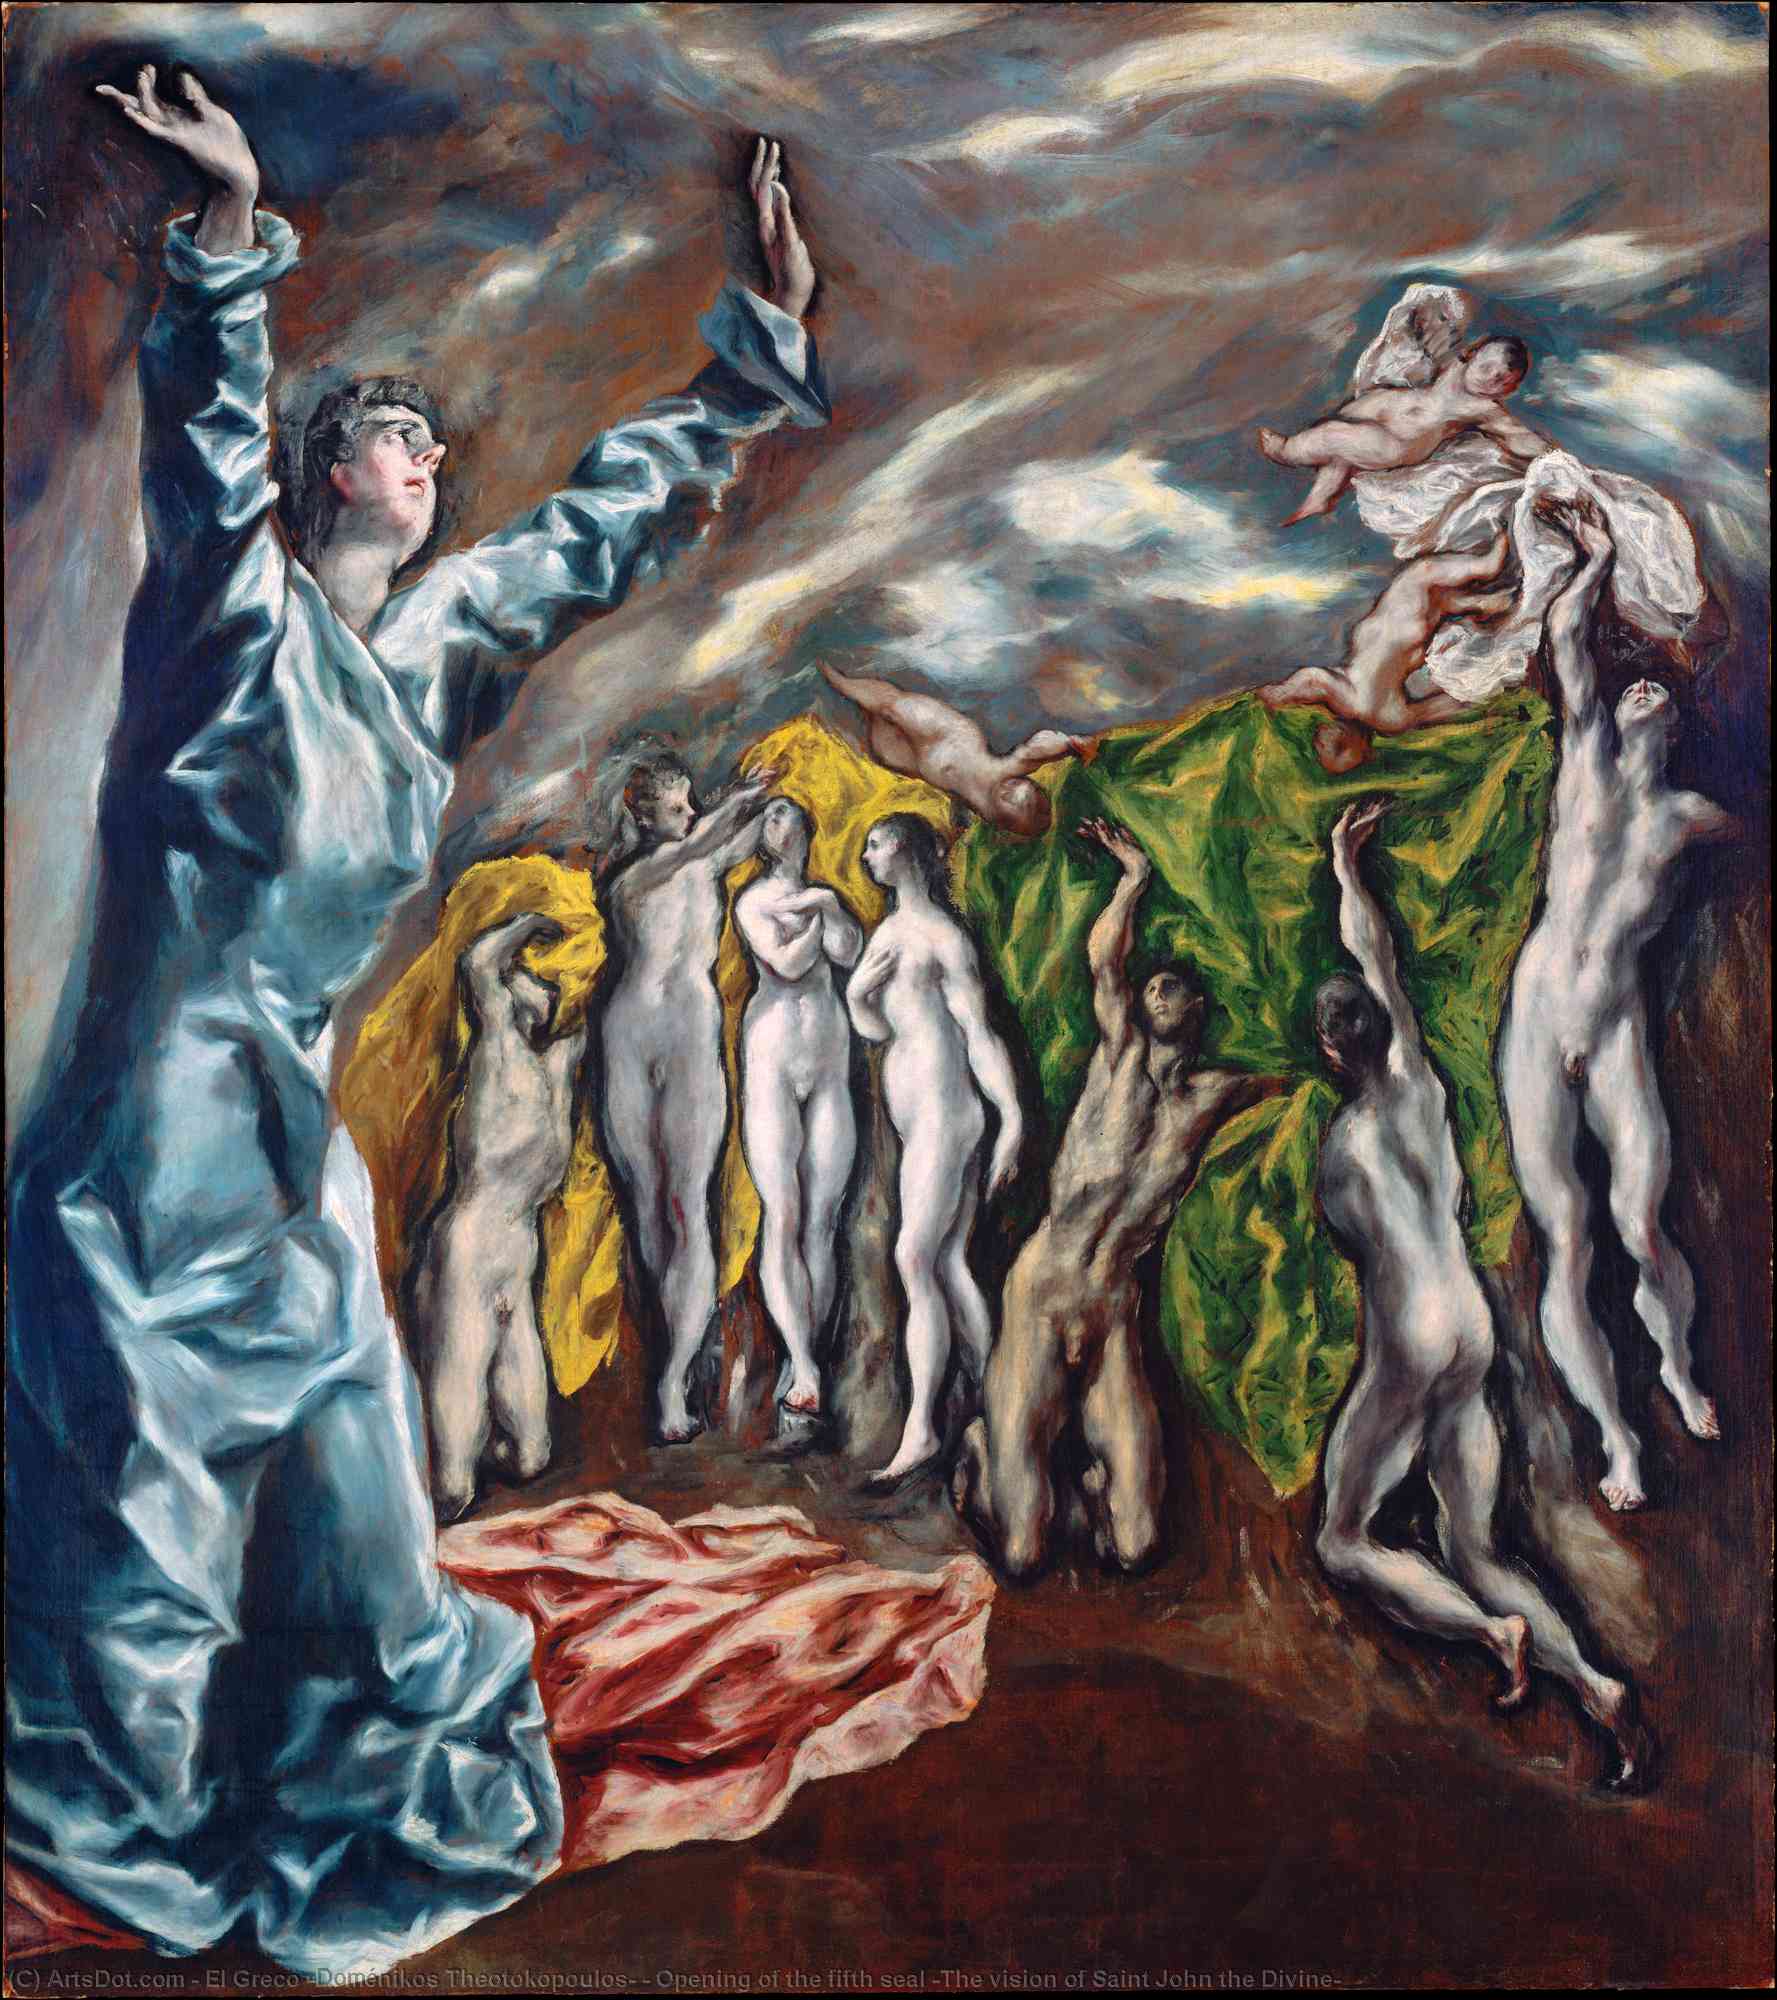 WikiOO.org - Encyclopedia of Fine Arts - Maľba, Artwork El Greco (Doménikos Theotokopoulos) - Opening of the fifth seal (The vision of Saint John the Divine)